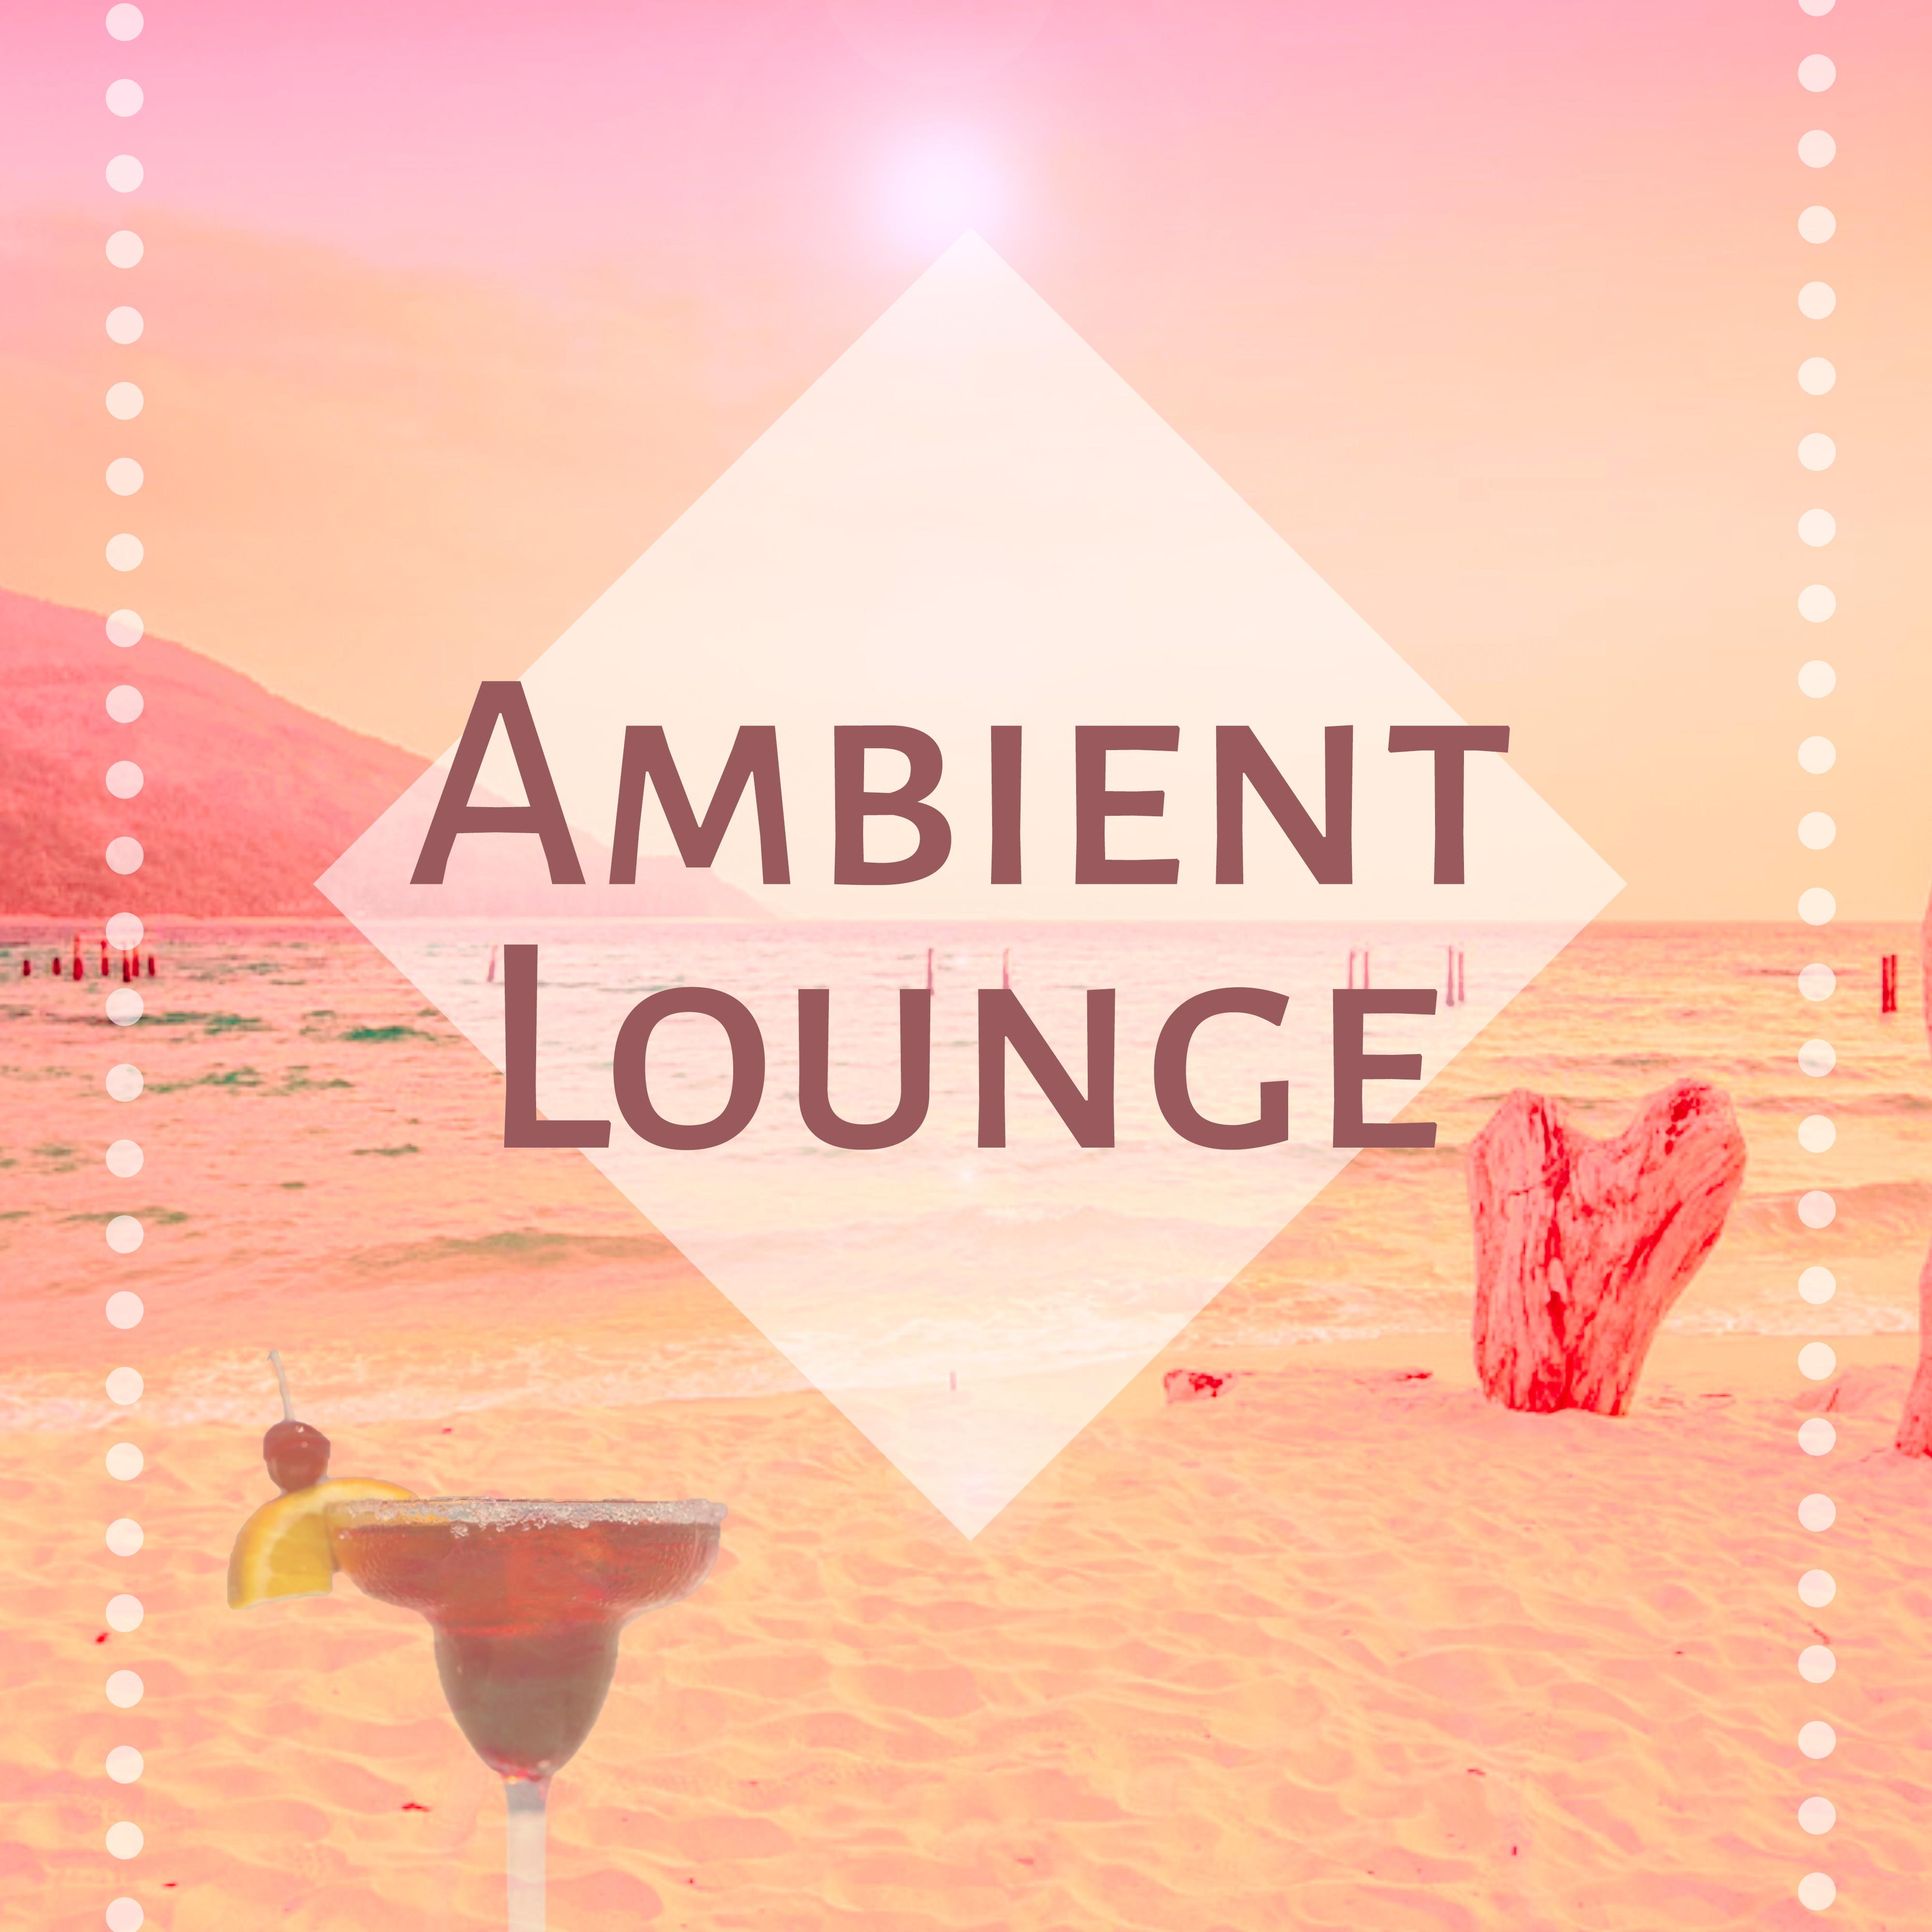 Ambient Lounge - Ibiza Chillout, Ambient Lounge, New York Chillout, Relax Chill Out Music, Pure Relaxation